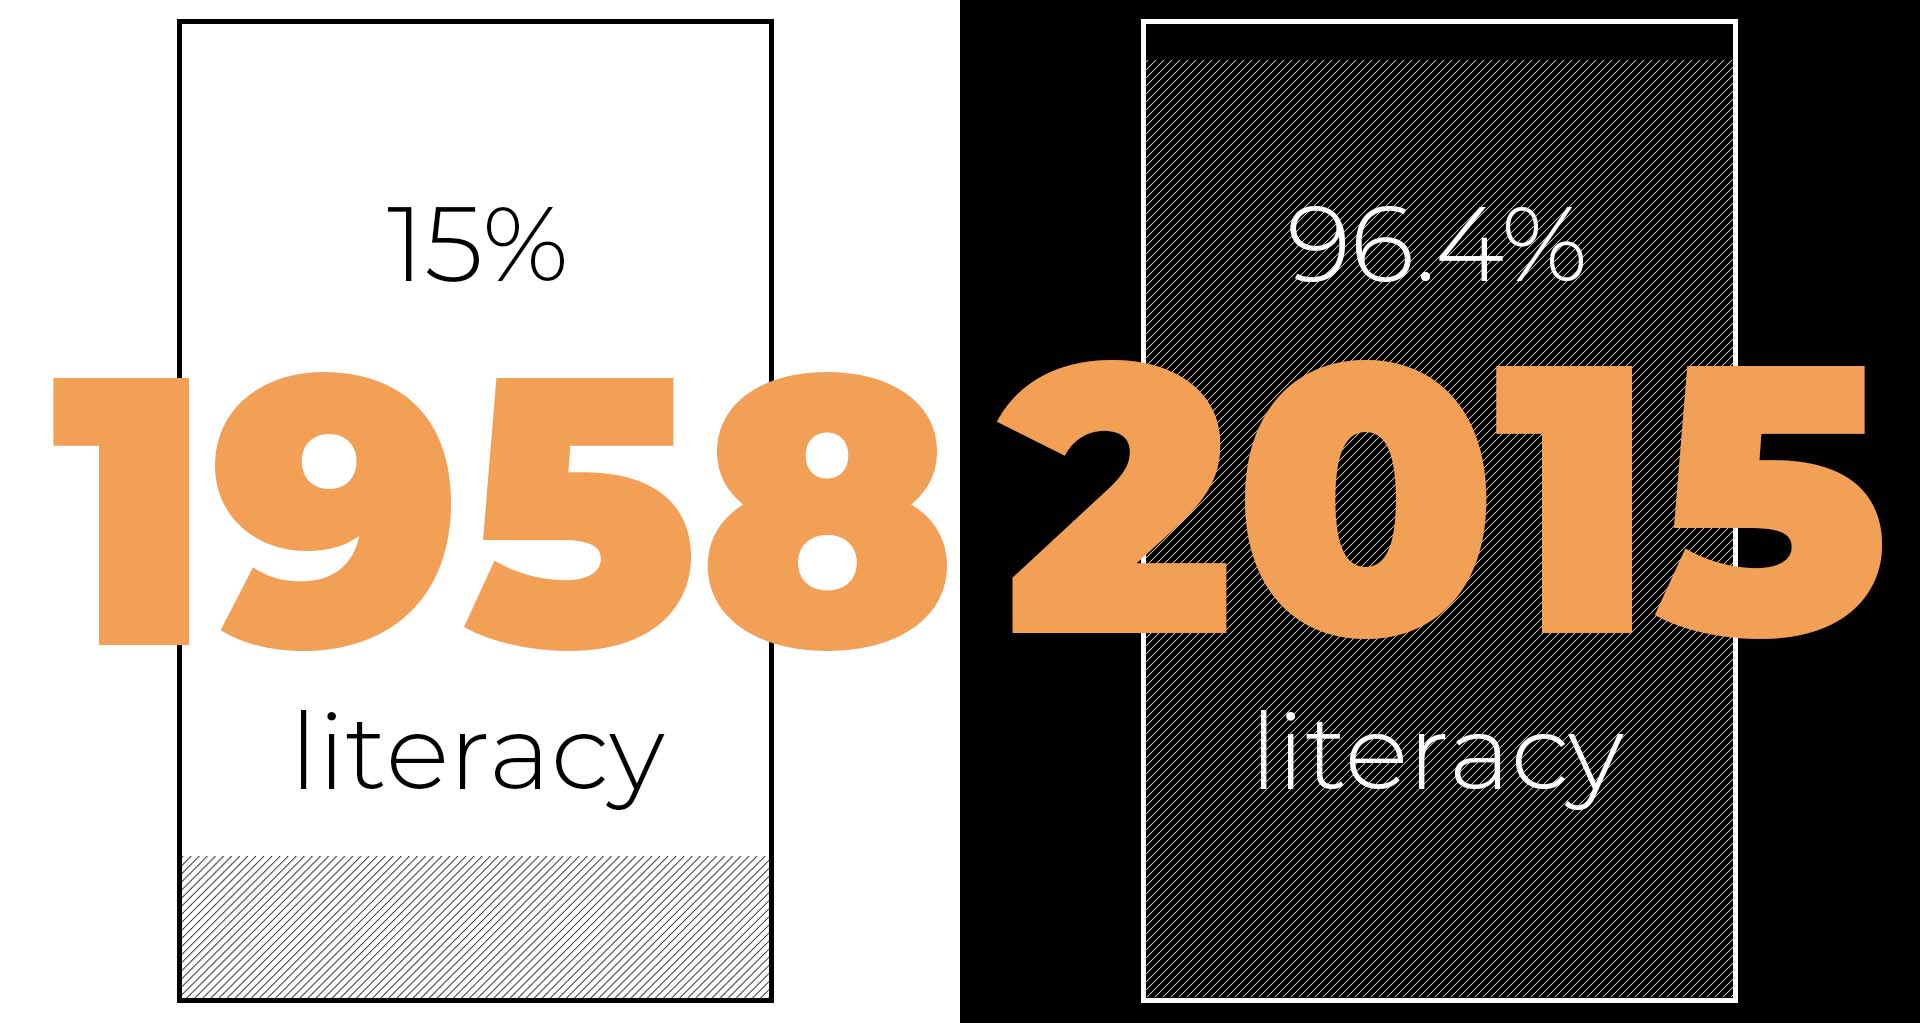 visual depiction of the changing literacy rates from 1958 to 2015